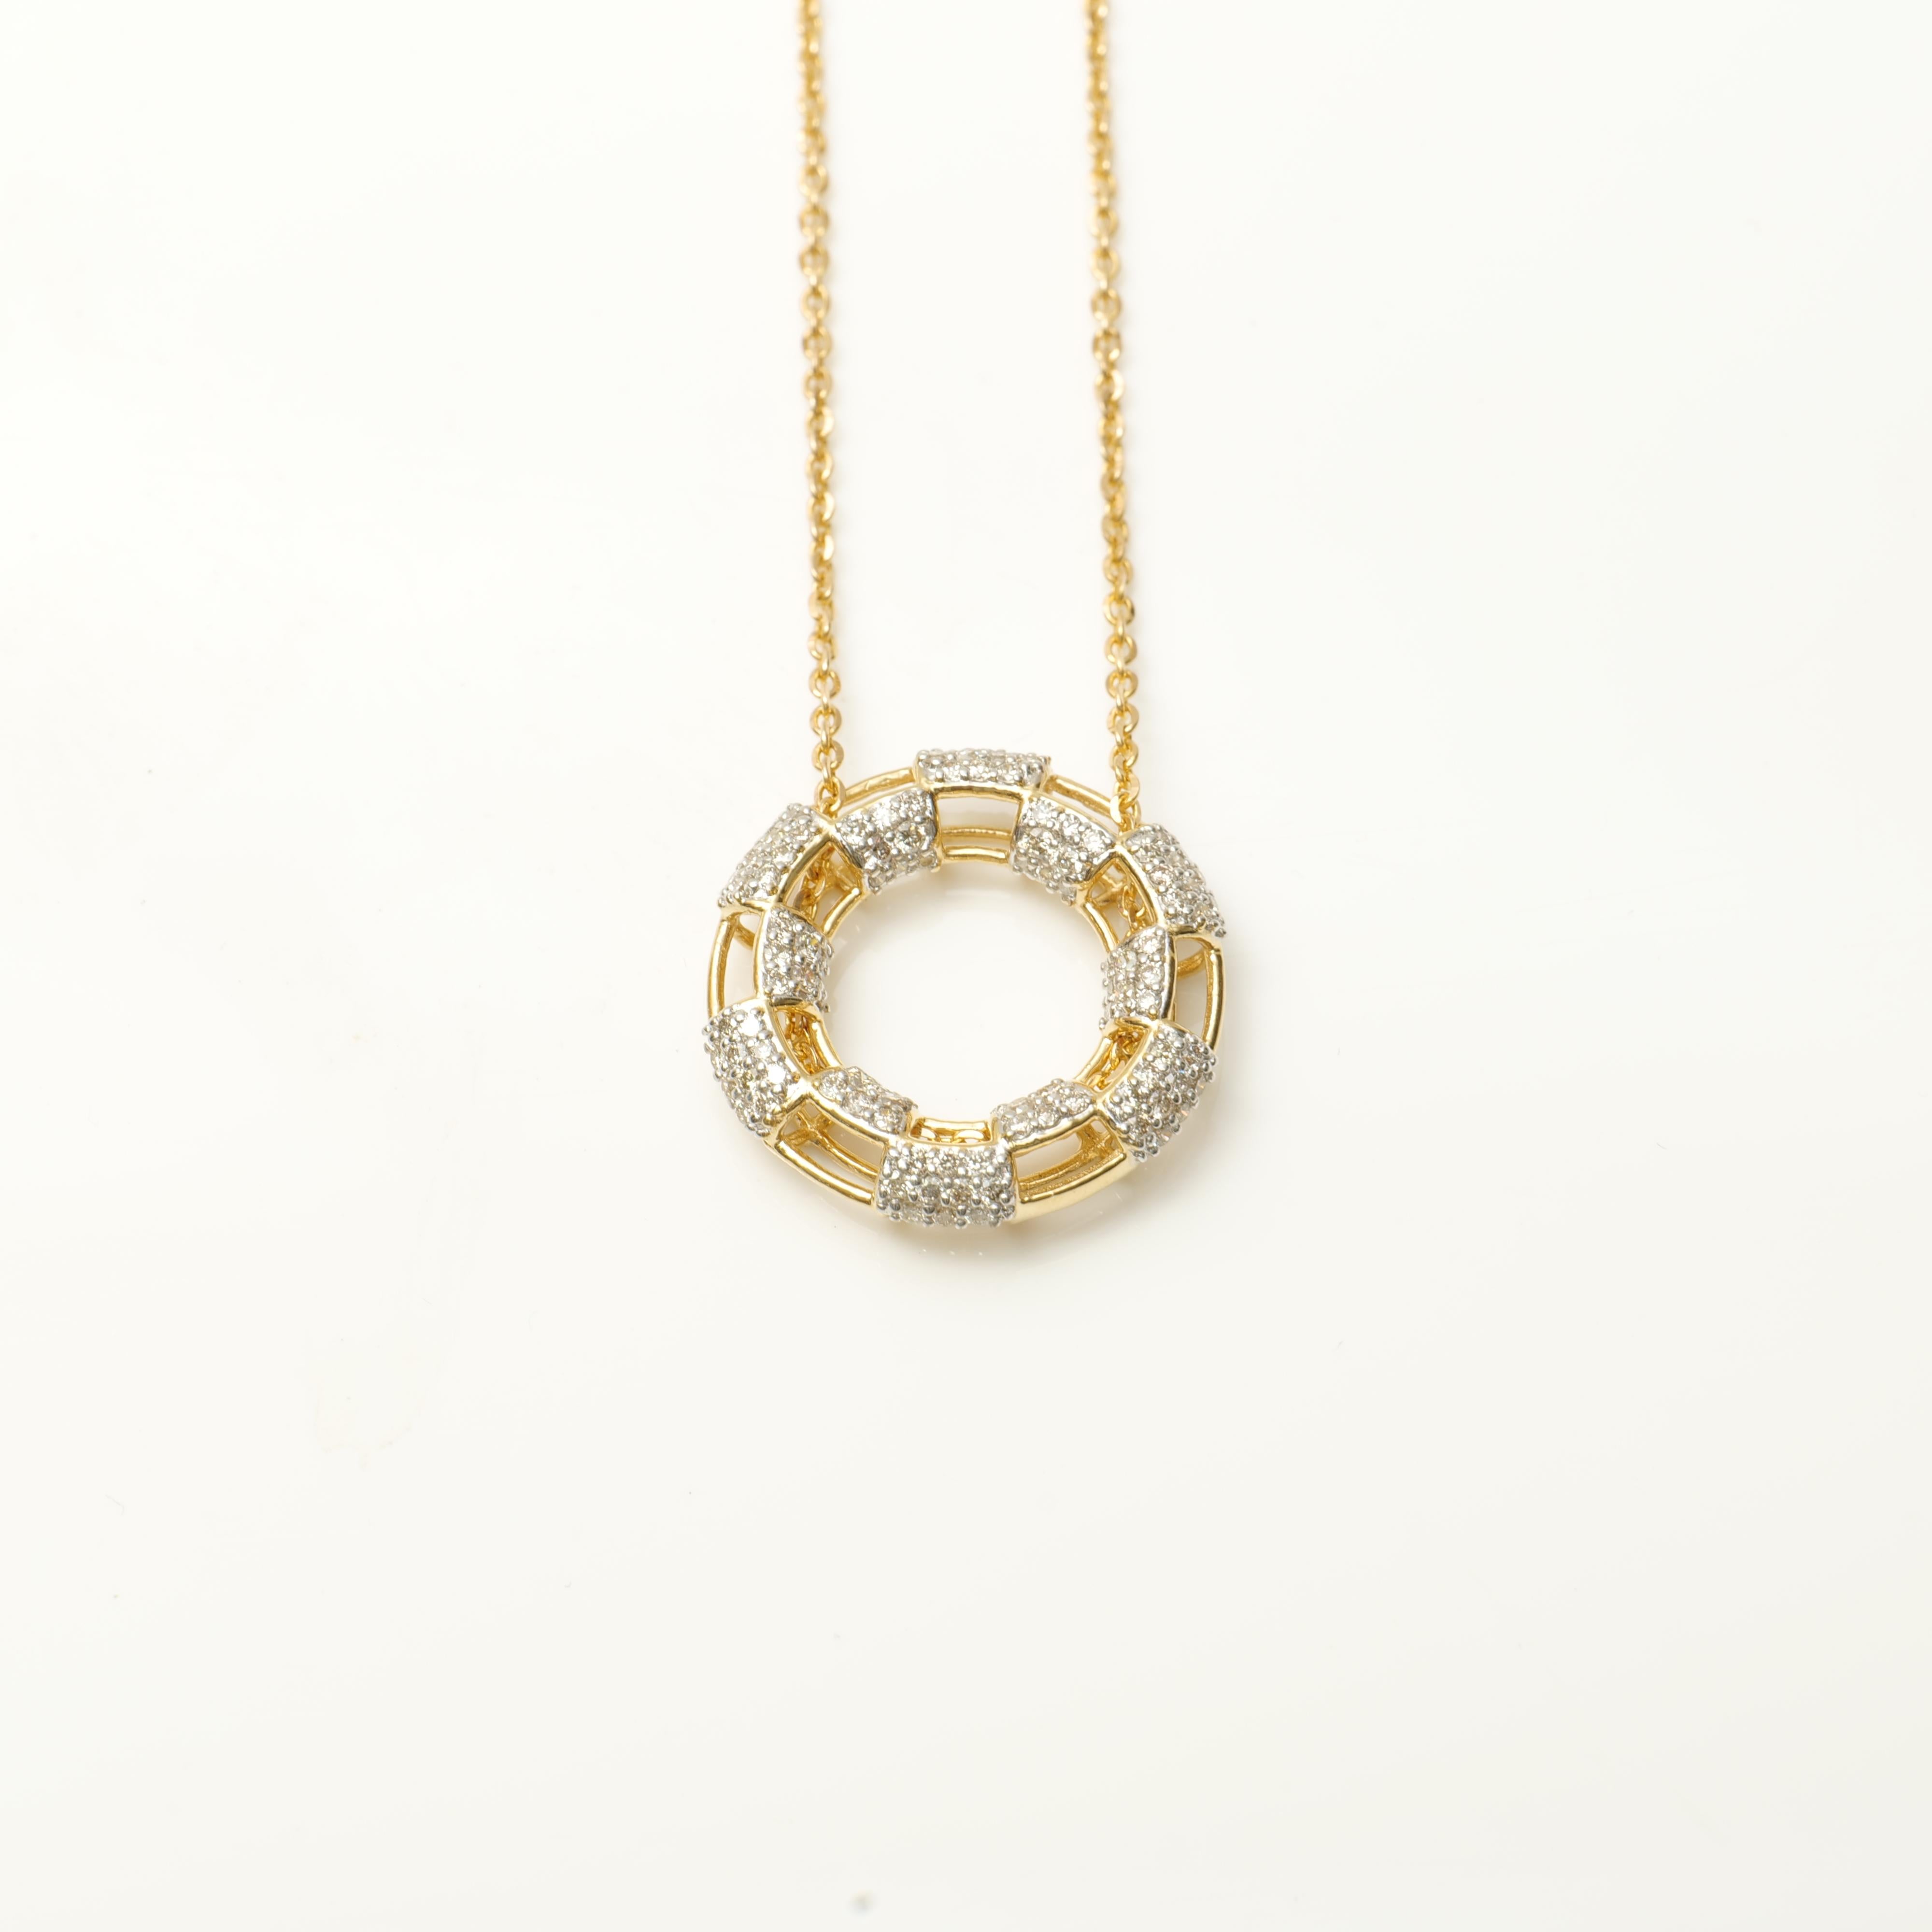 
The Circle Round Diamonds Pendant Necklace in 18K Solid Gold is a captivating and elegant piece of jewelry. It features a beautiful design with concentric circles adorned with brilliant round diamonds, all crafted from high-quality 18K solid gold.